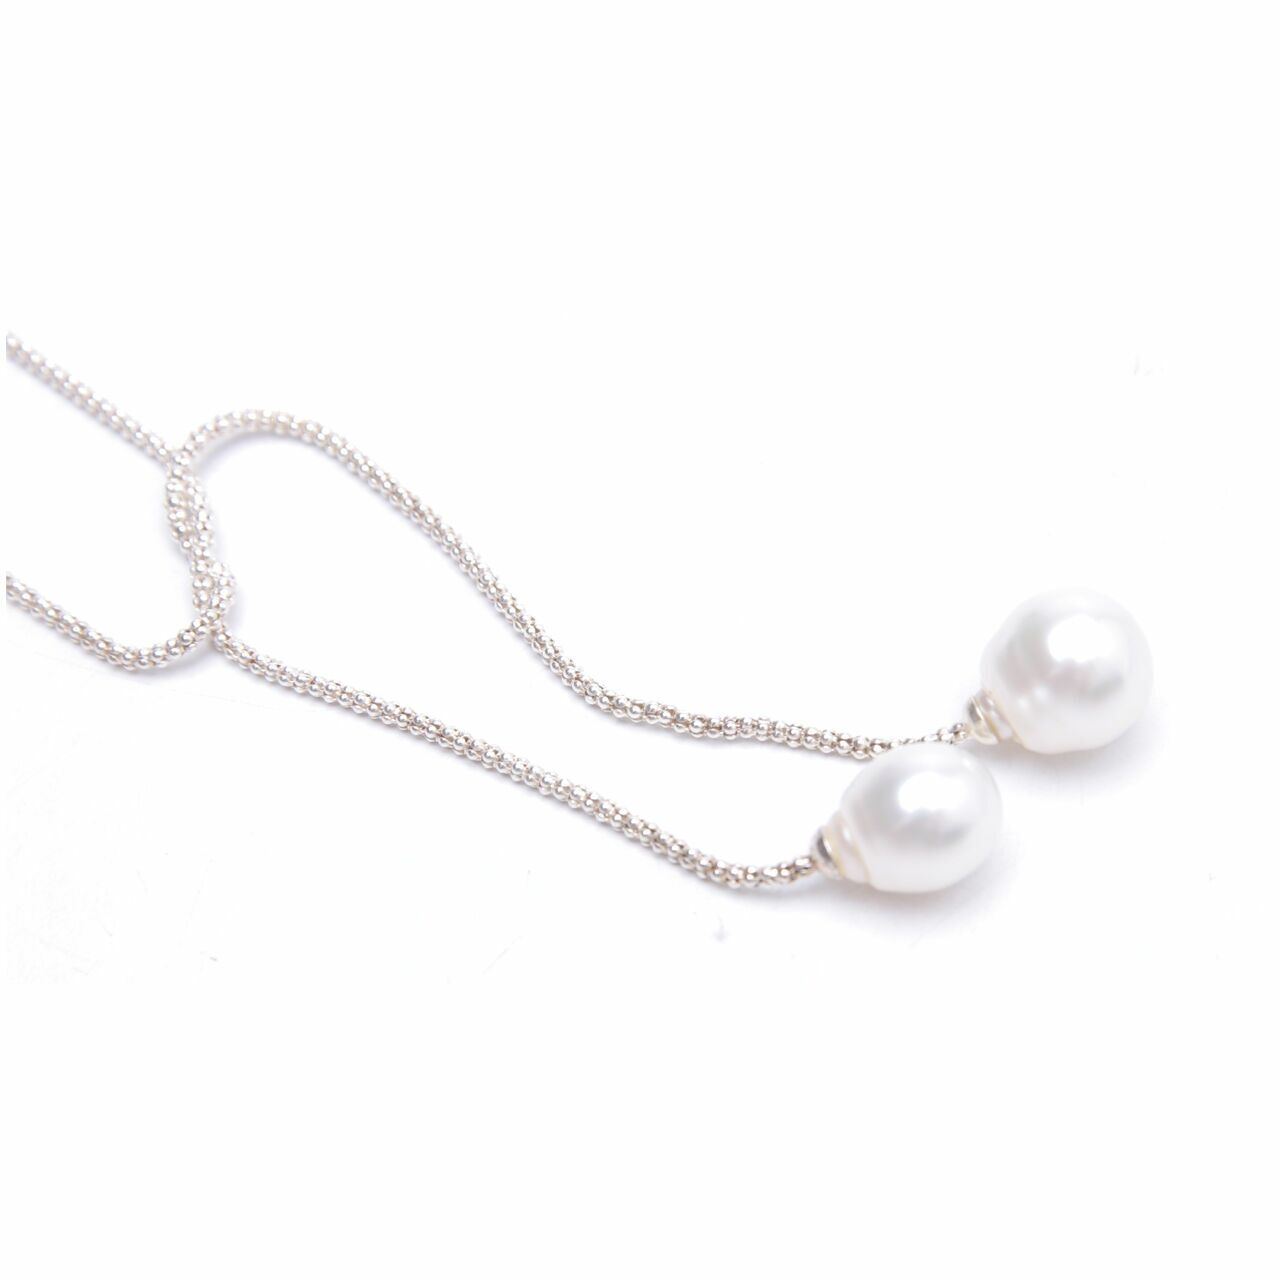 ATLAS Pearls Silver Necklace Jewelry